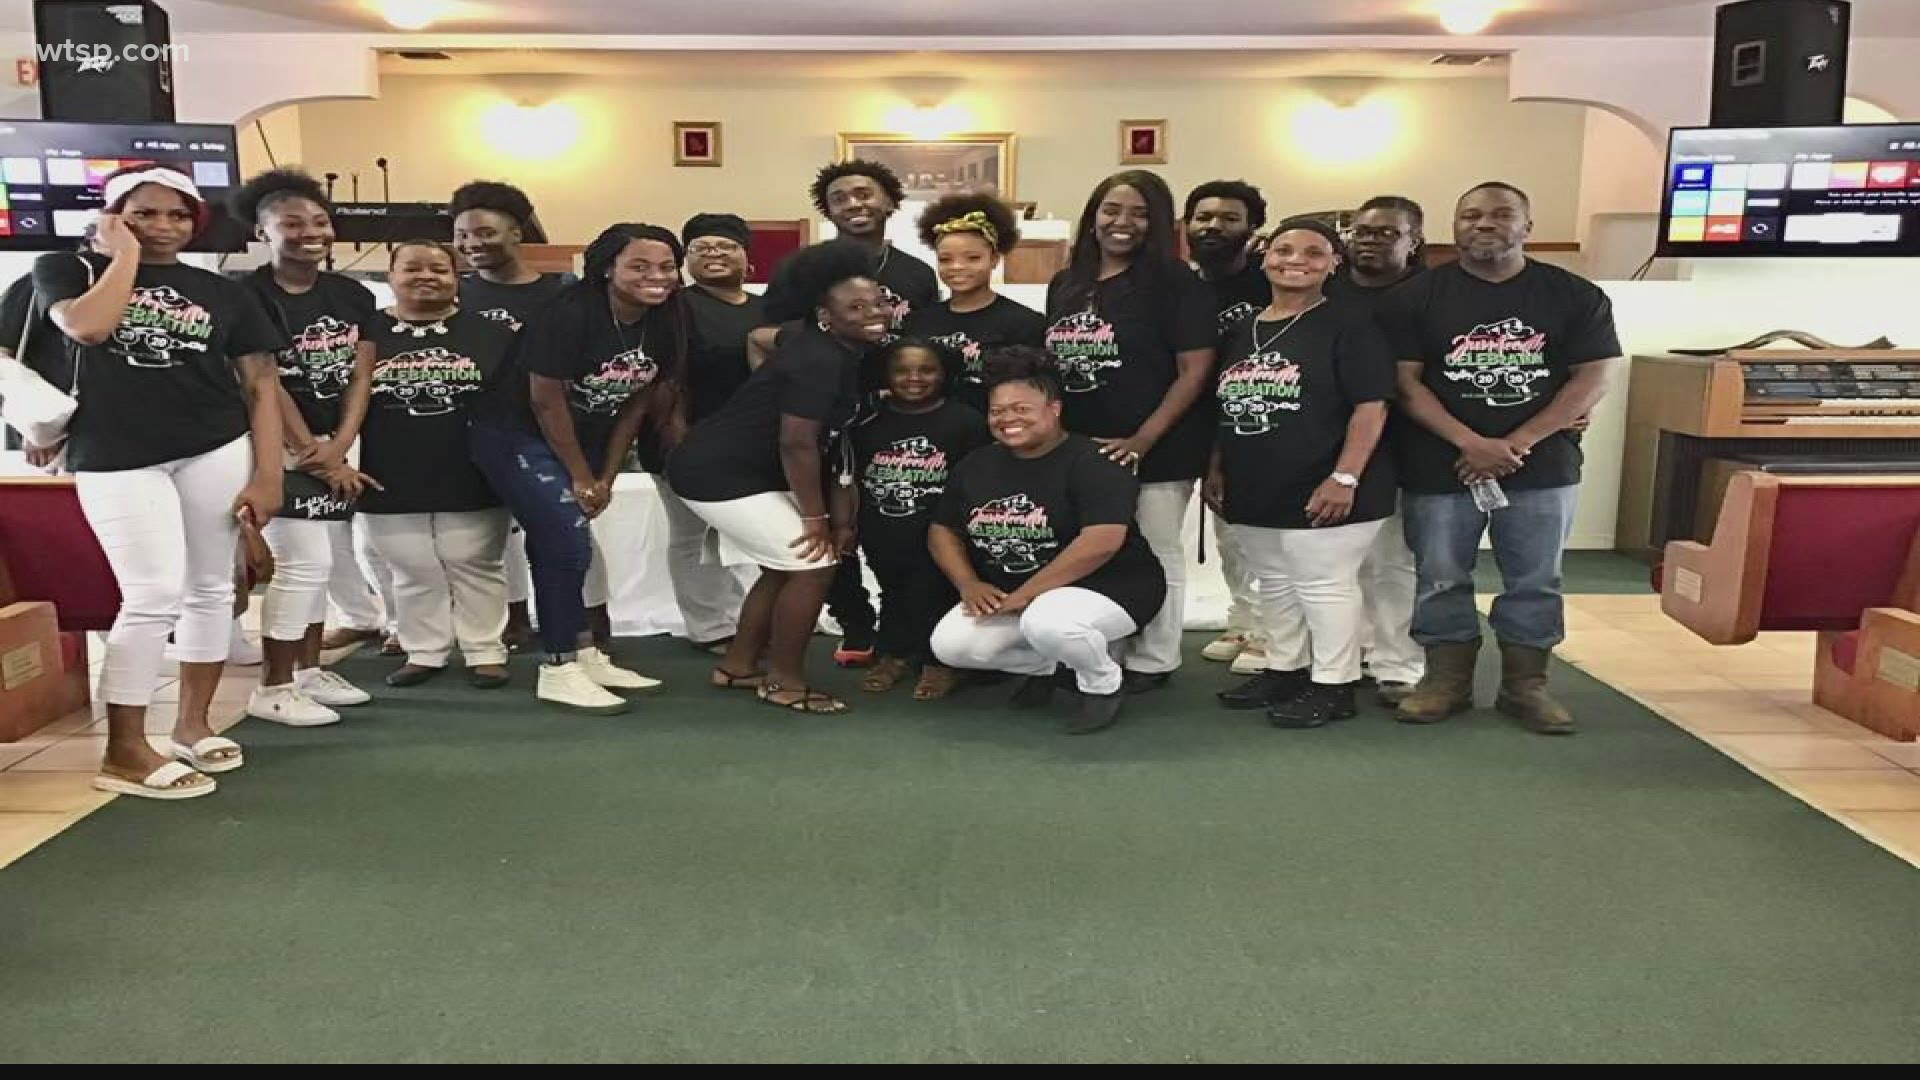 For the last few years, the Tampa Bay Juneteenth Coalition has held a community awards ceremony, pageant and a big street fair to celebrate the holiday.